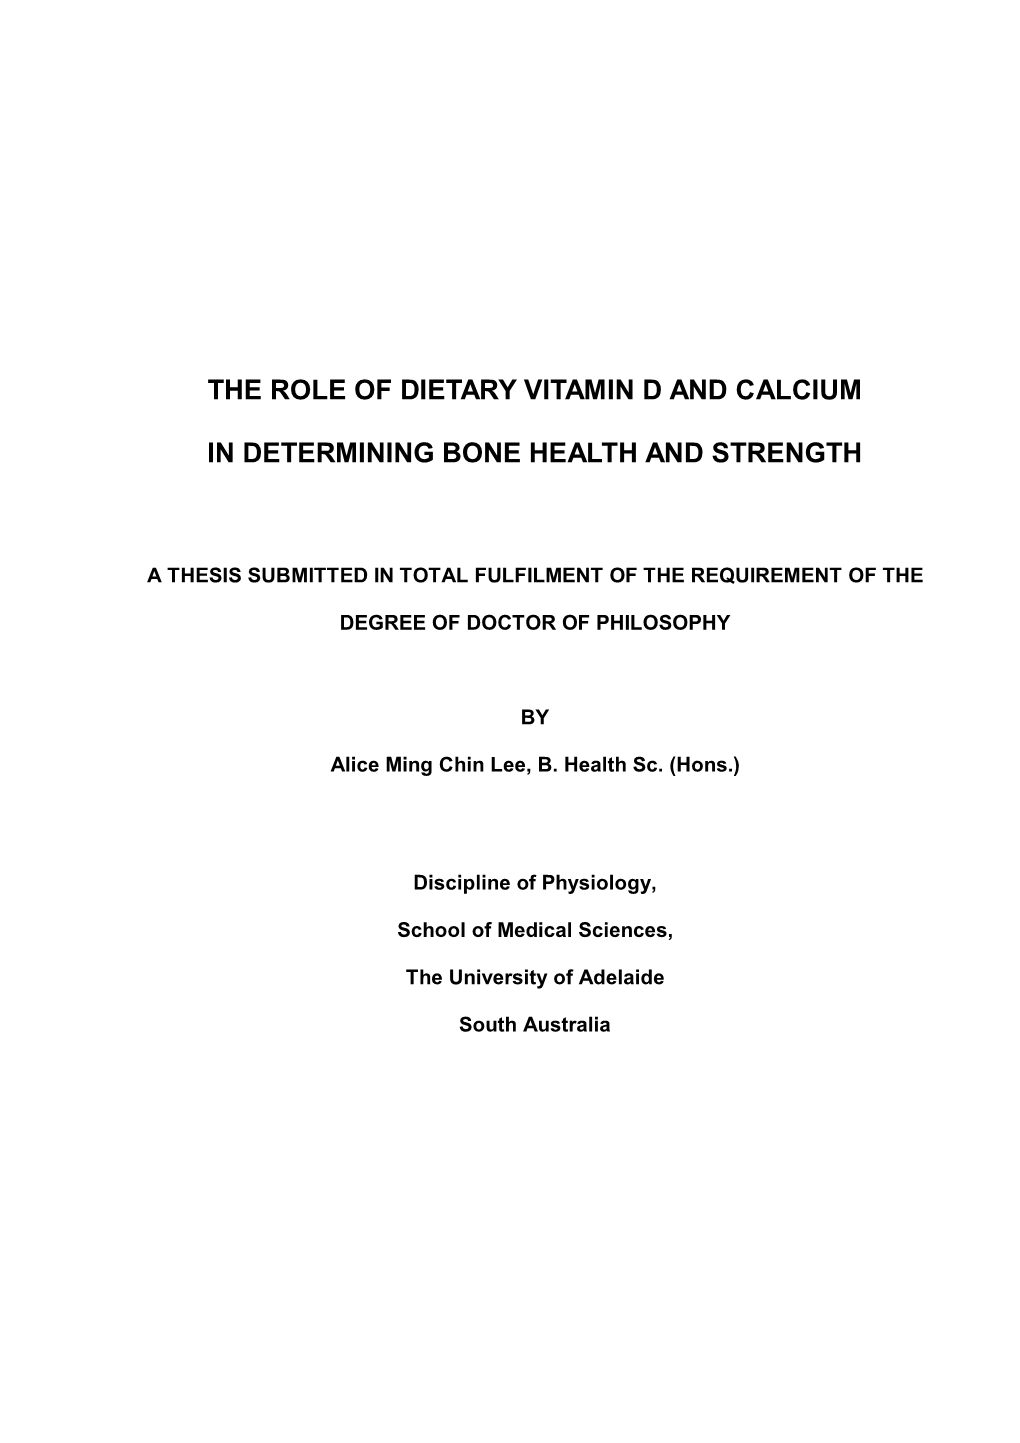 The Role of Dietary Vitamin D and Calcium in Determining Bone Health and Strength